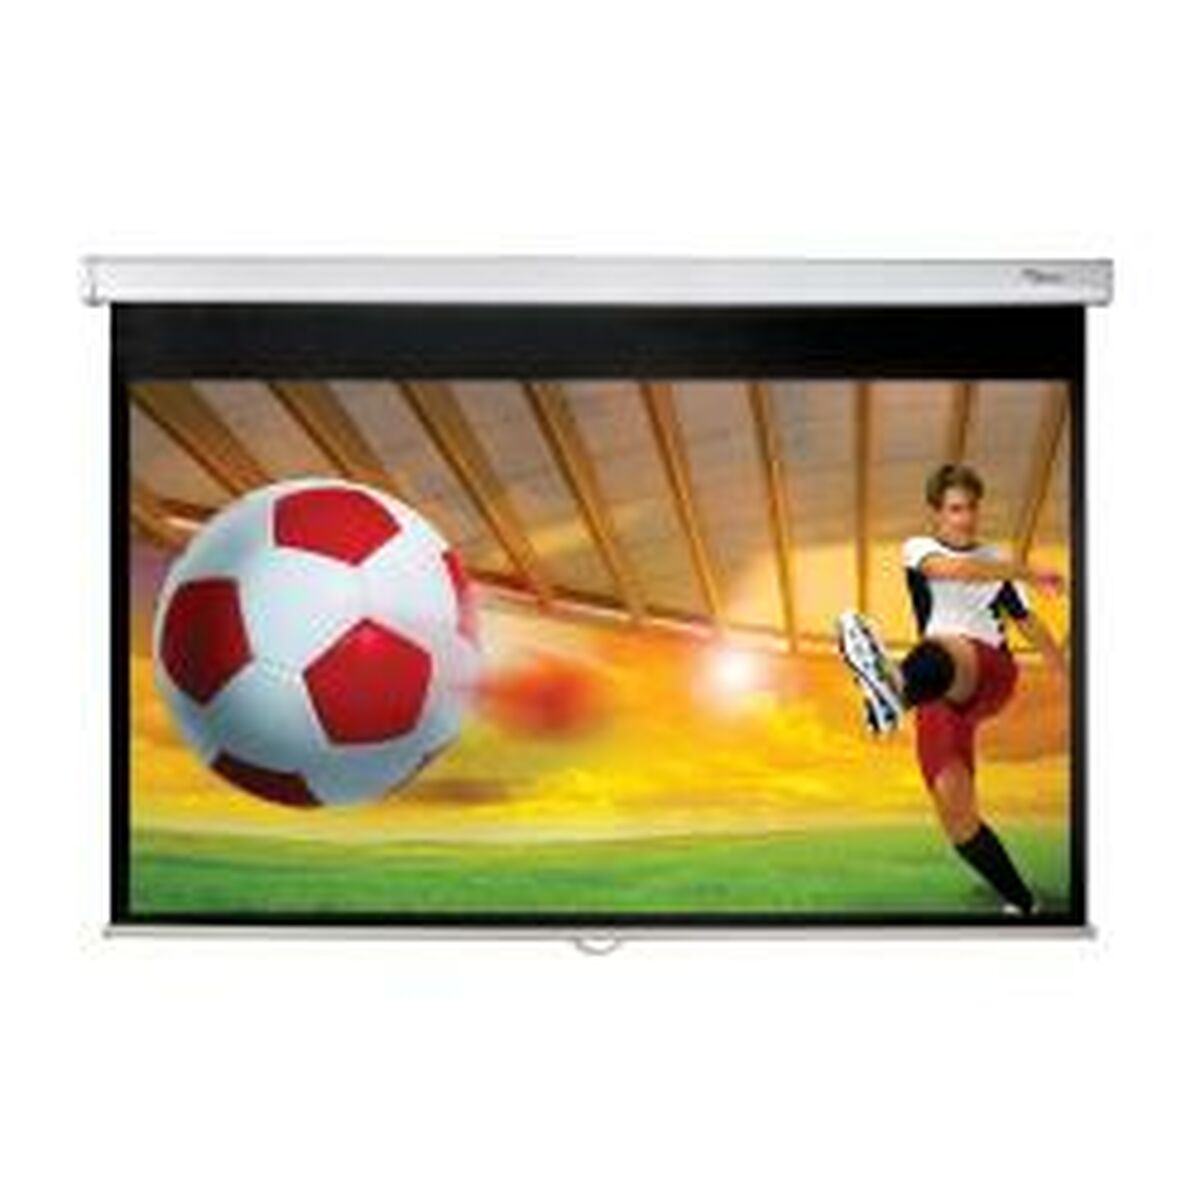 Projection Screen Optoma DS-9092PWC, Optoma, Electronics, TV, Video and home cinema, projection-screen-optoma-ds-9092pwc, Brand_Optoma, category-reference-2609, category-reference-2642, category-reference-2852, category-reference-t-18805, category-reference-t-19653, category-reference-t-19921, category-reference-t-21391, cinema and television, computers / peripherals, Condition_NEW, entertainment, office, Price_200 - 300, RiotNook